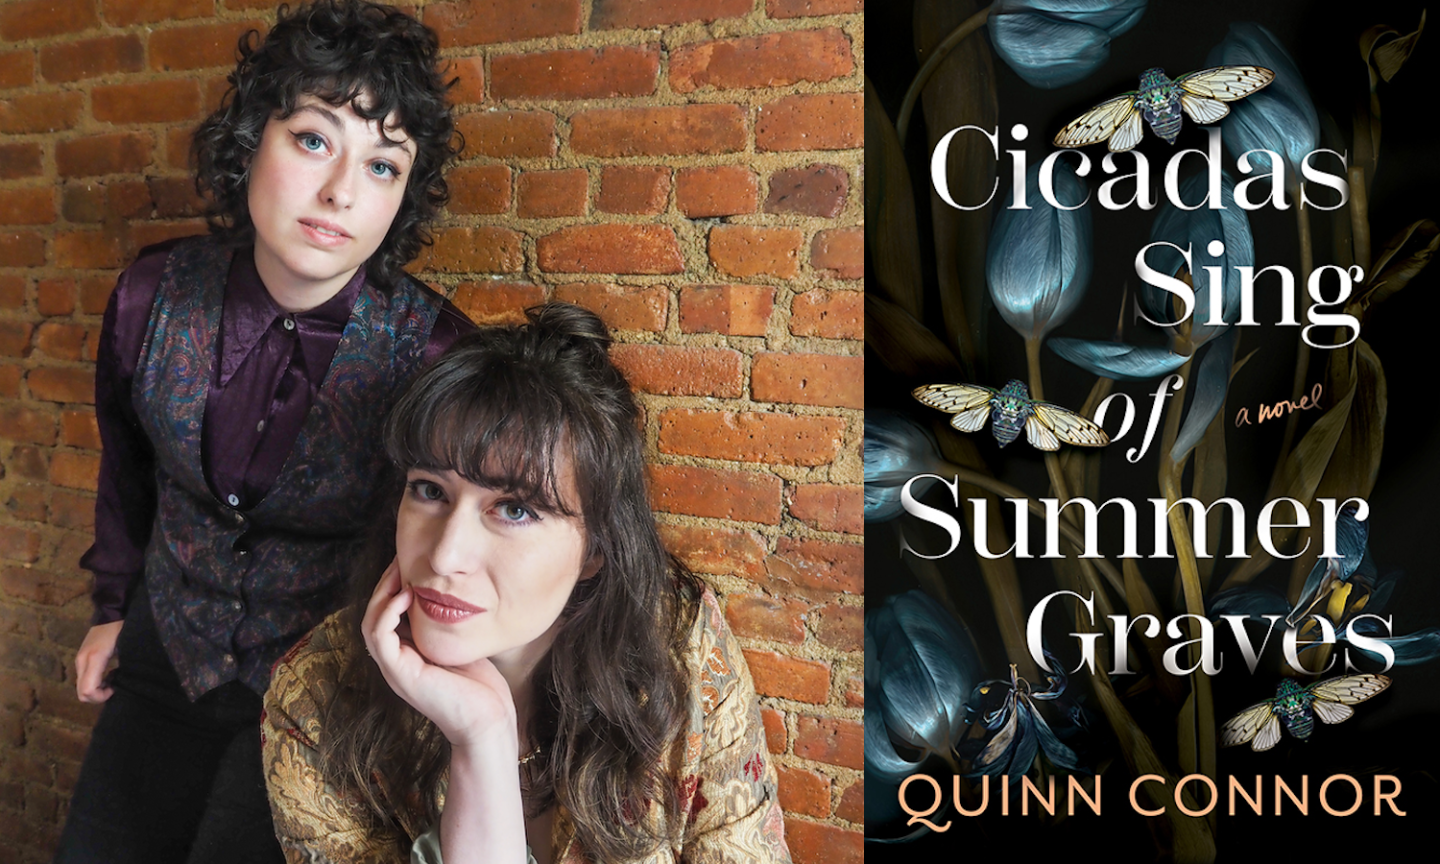 authors of Cicadas Sing of Summer Graves